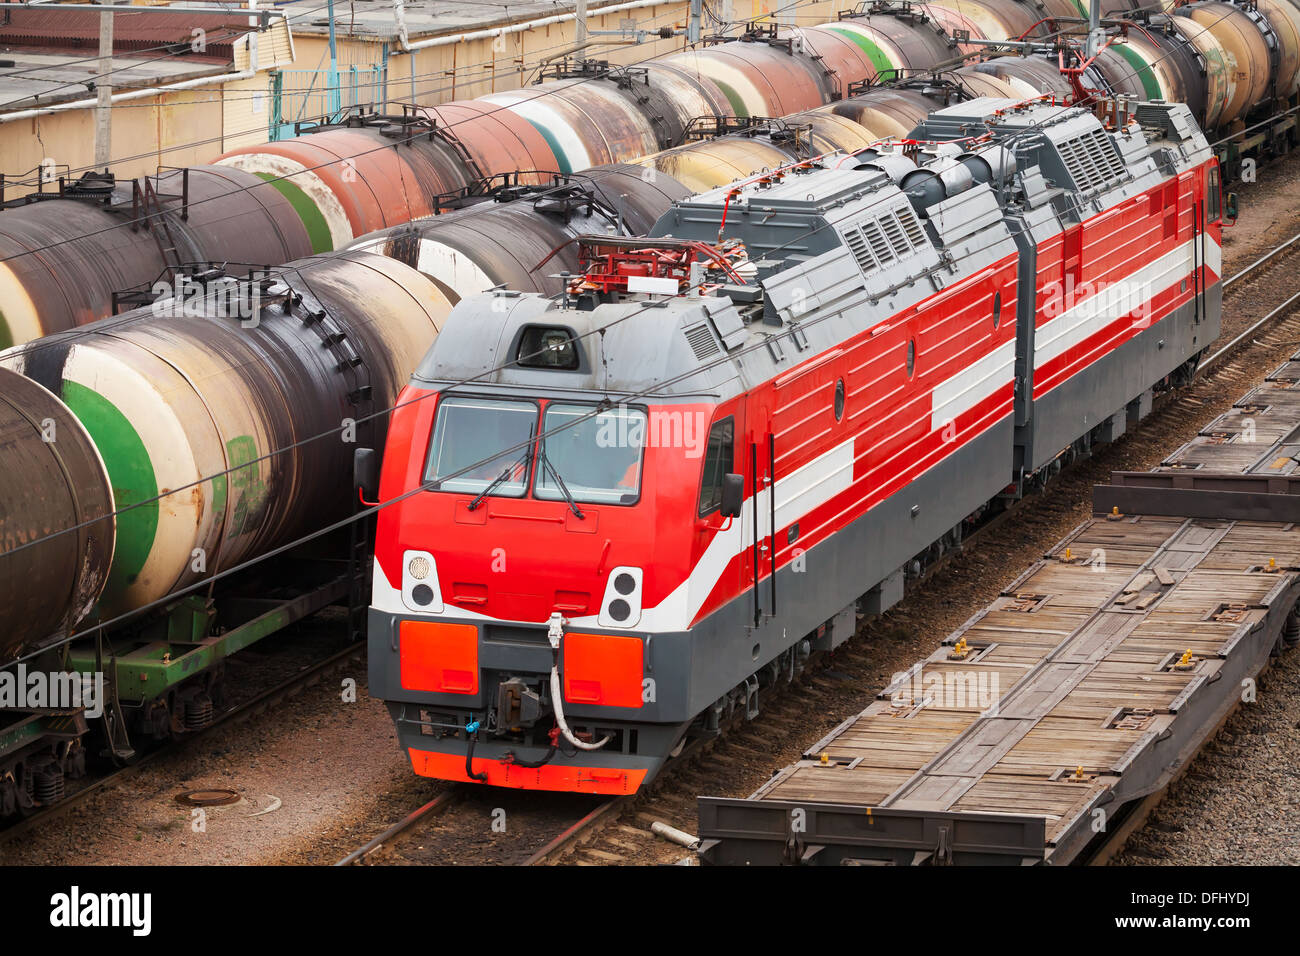 Modern red diesel electric locomotive rides on railway tracks with freight coaches Stock Photo